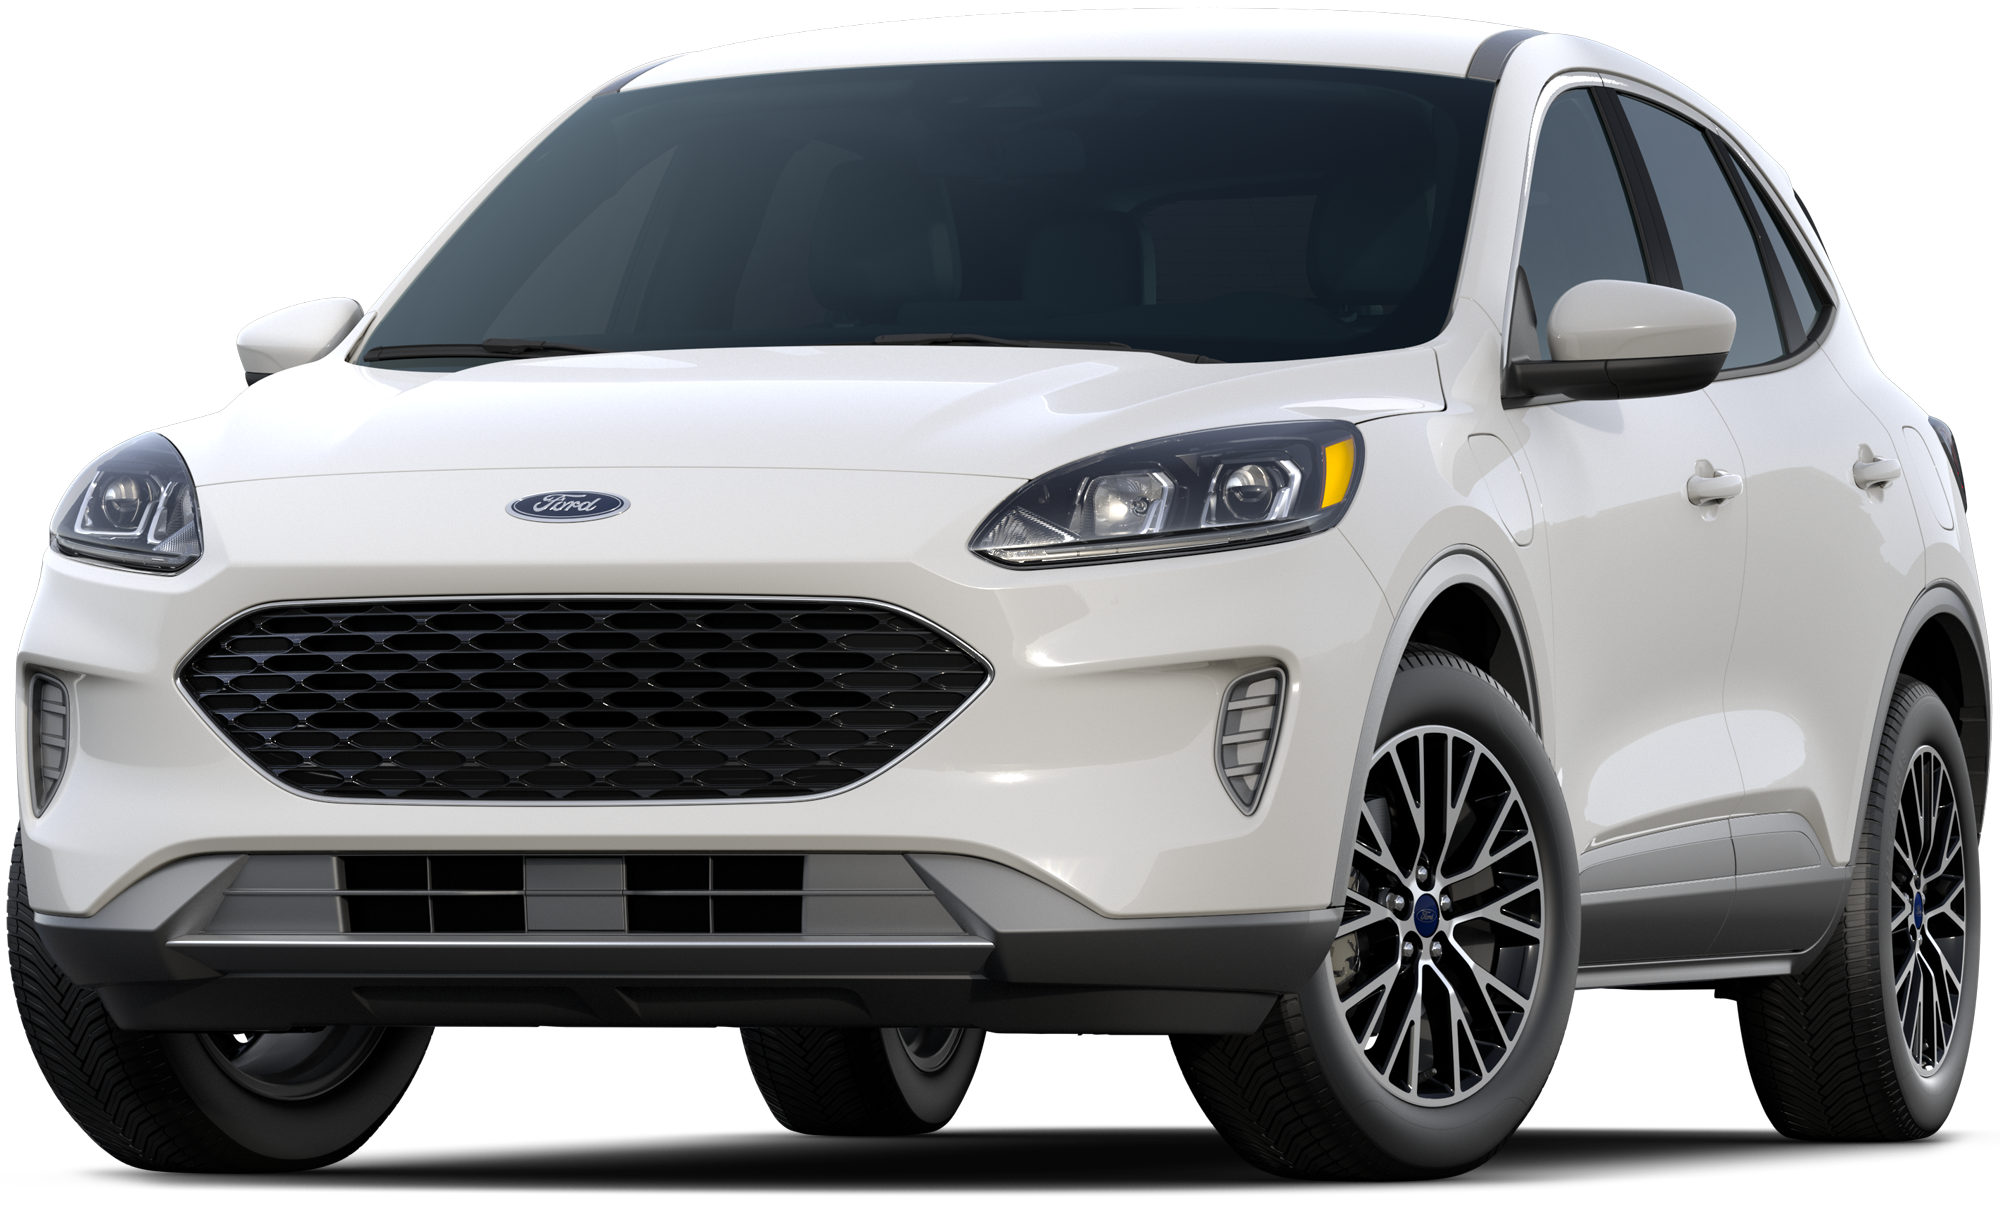 2020 Ford Escape PHEV Incentives, Specials & Offers in Pleasantville NY